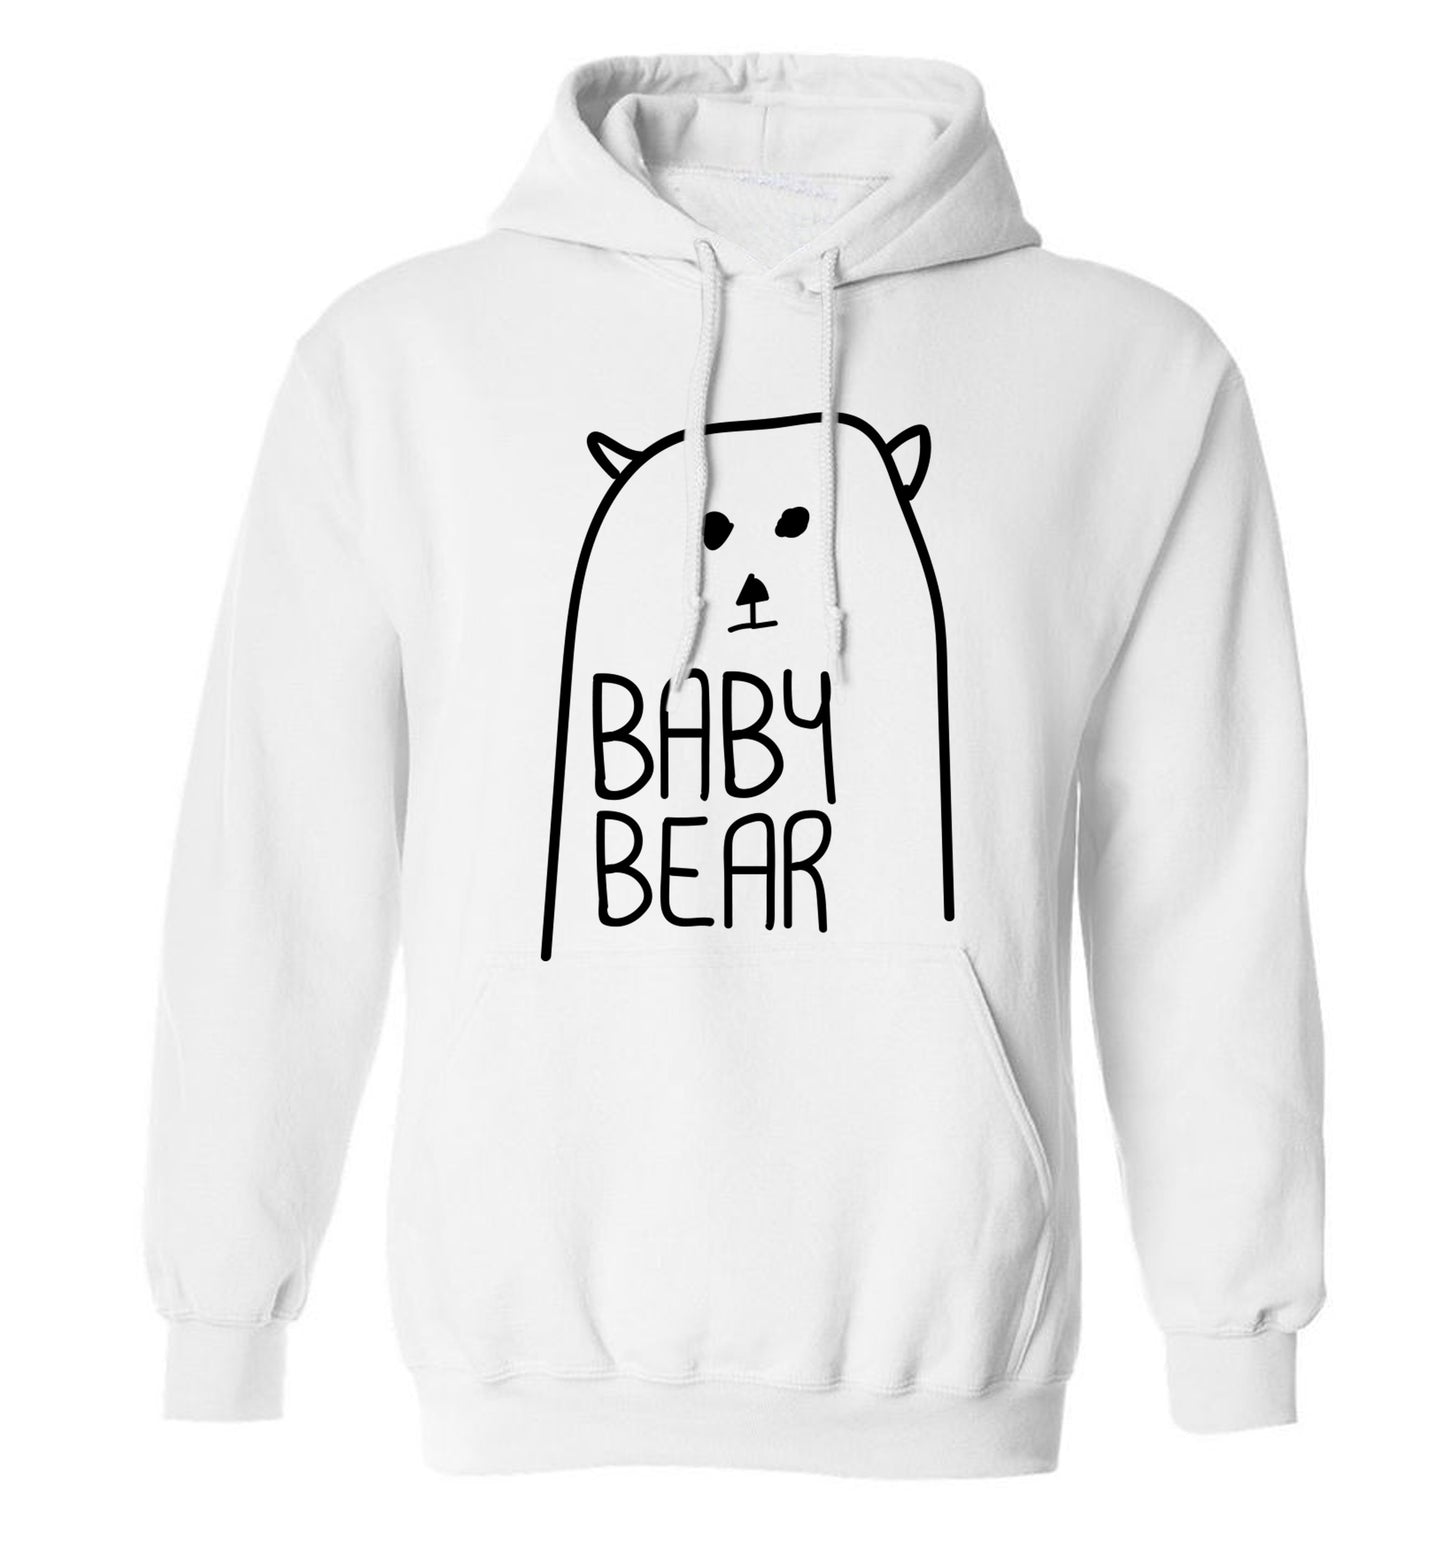 Baby bear adults unisex white hoodie 2XL